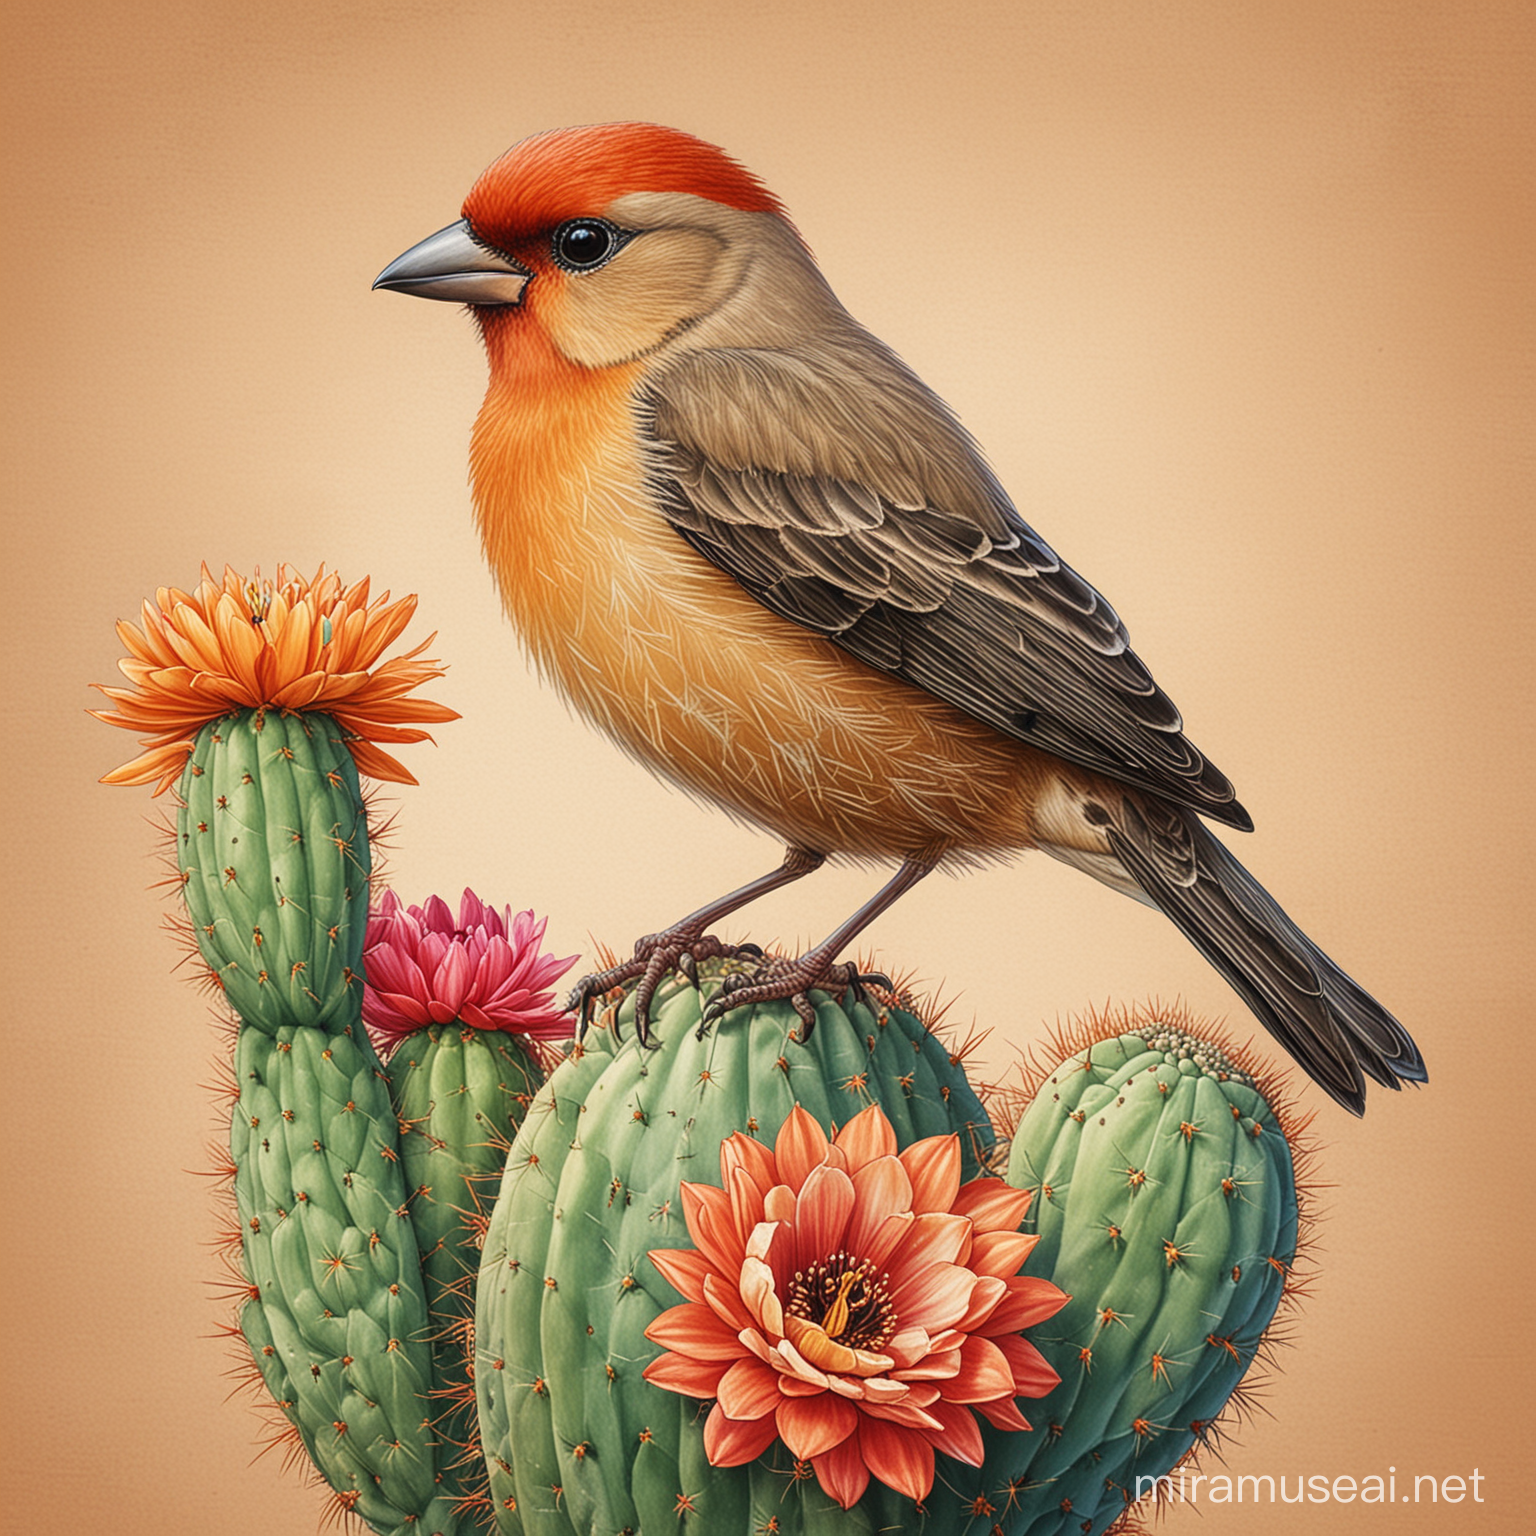 Colorful Finch Perched on Blooming Cactus